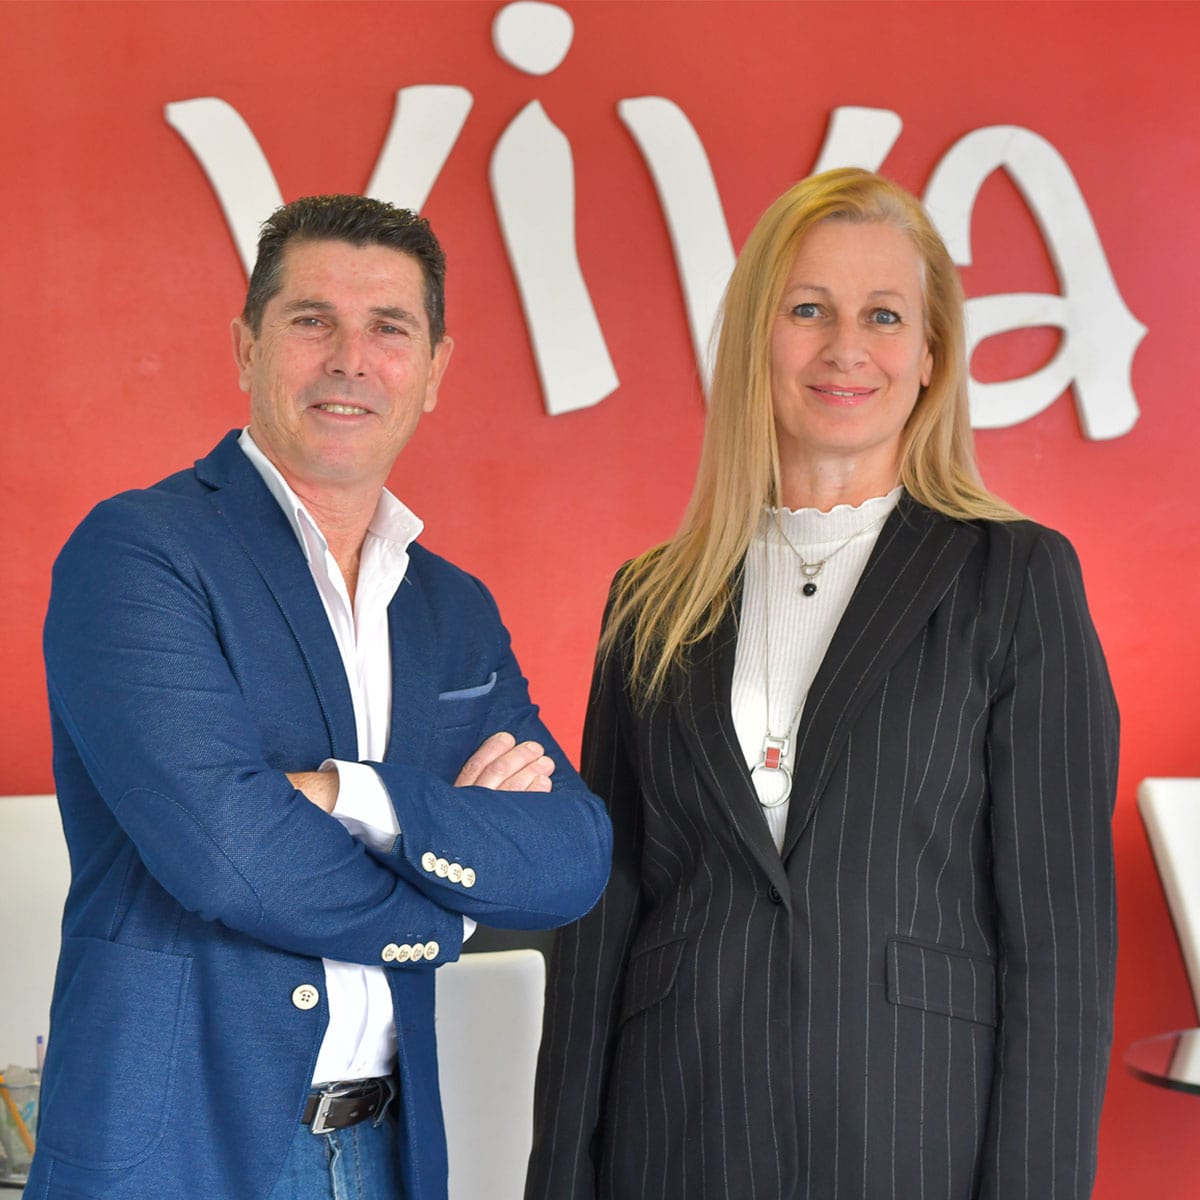 Meet the team - VIVA-Cánovas in Marbella Old Town will help you with all your rental enquiries